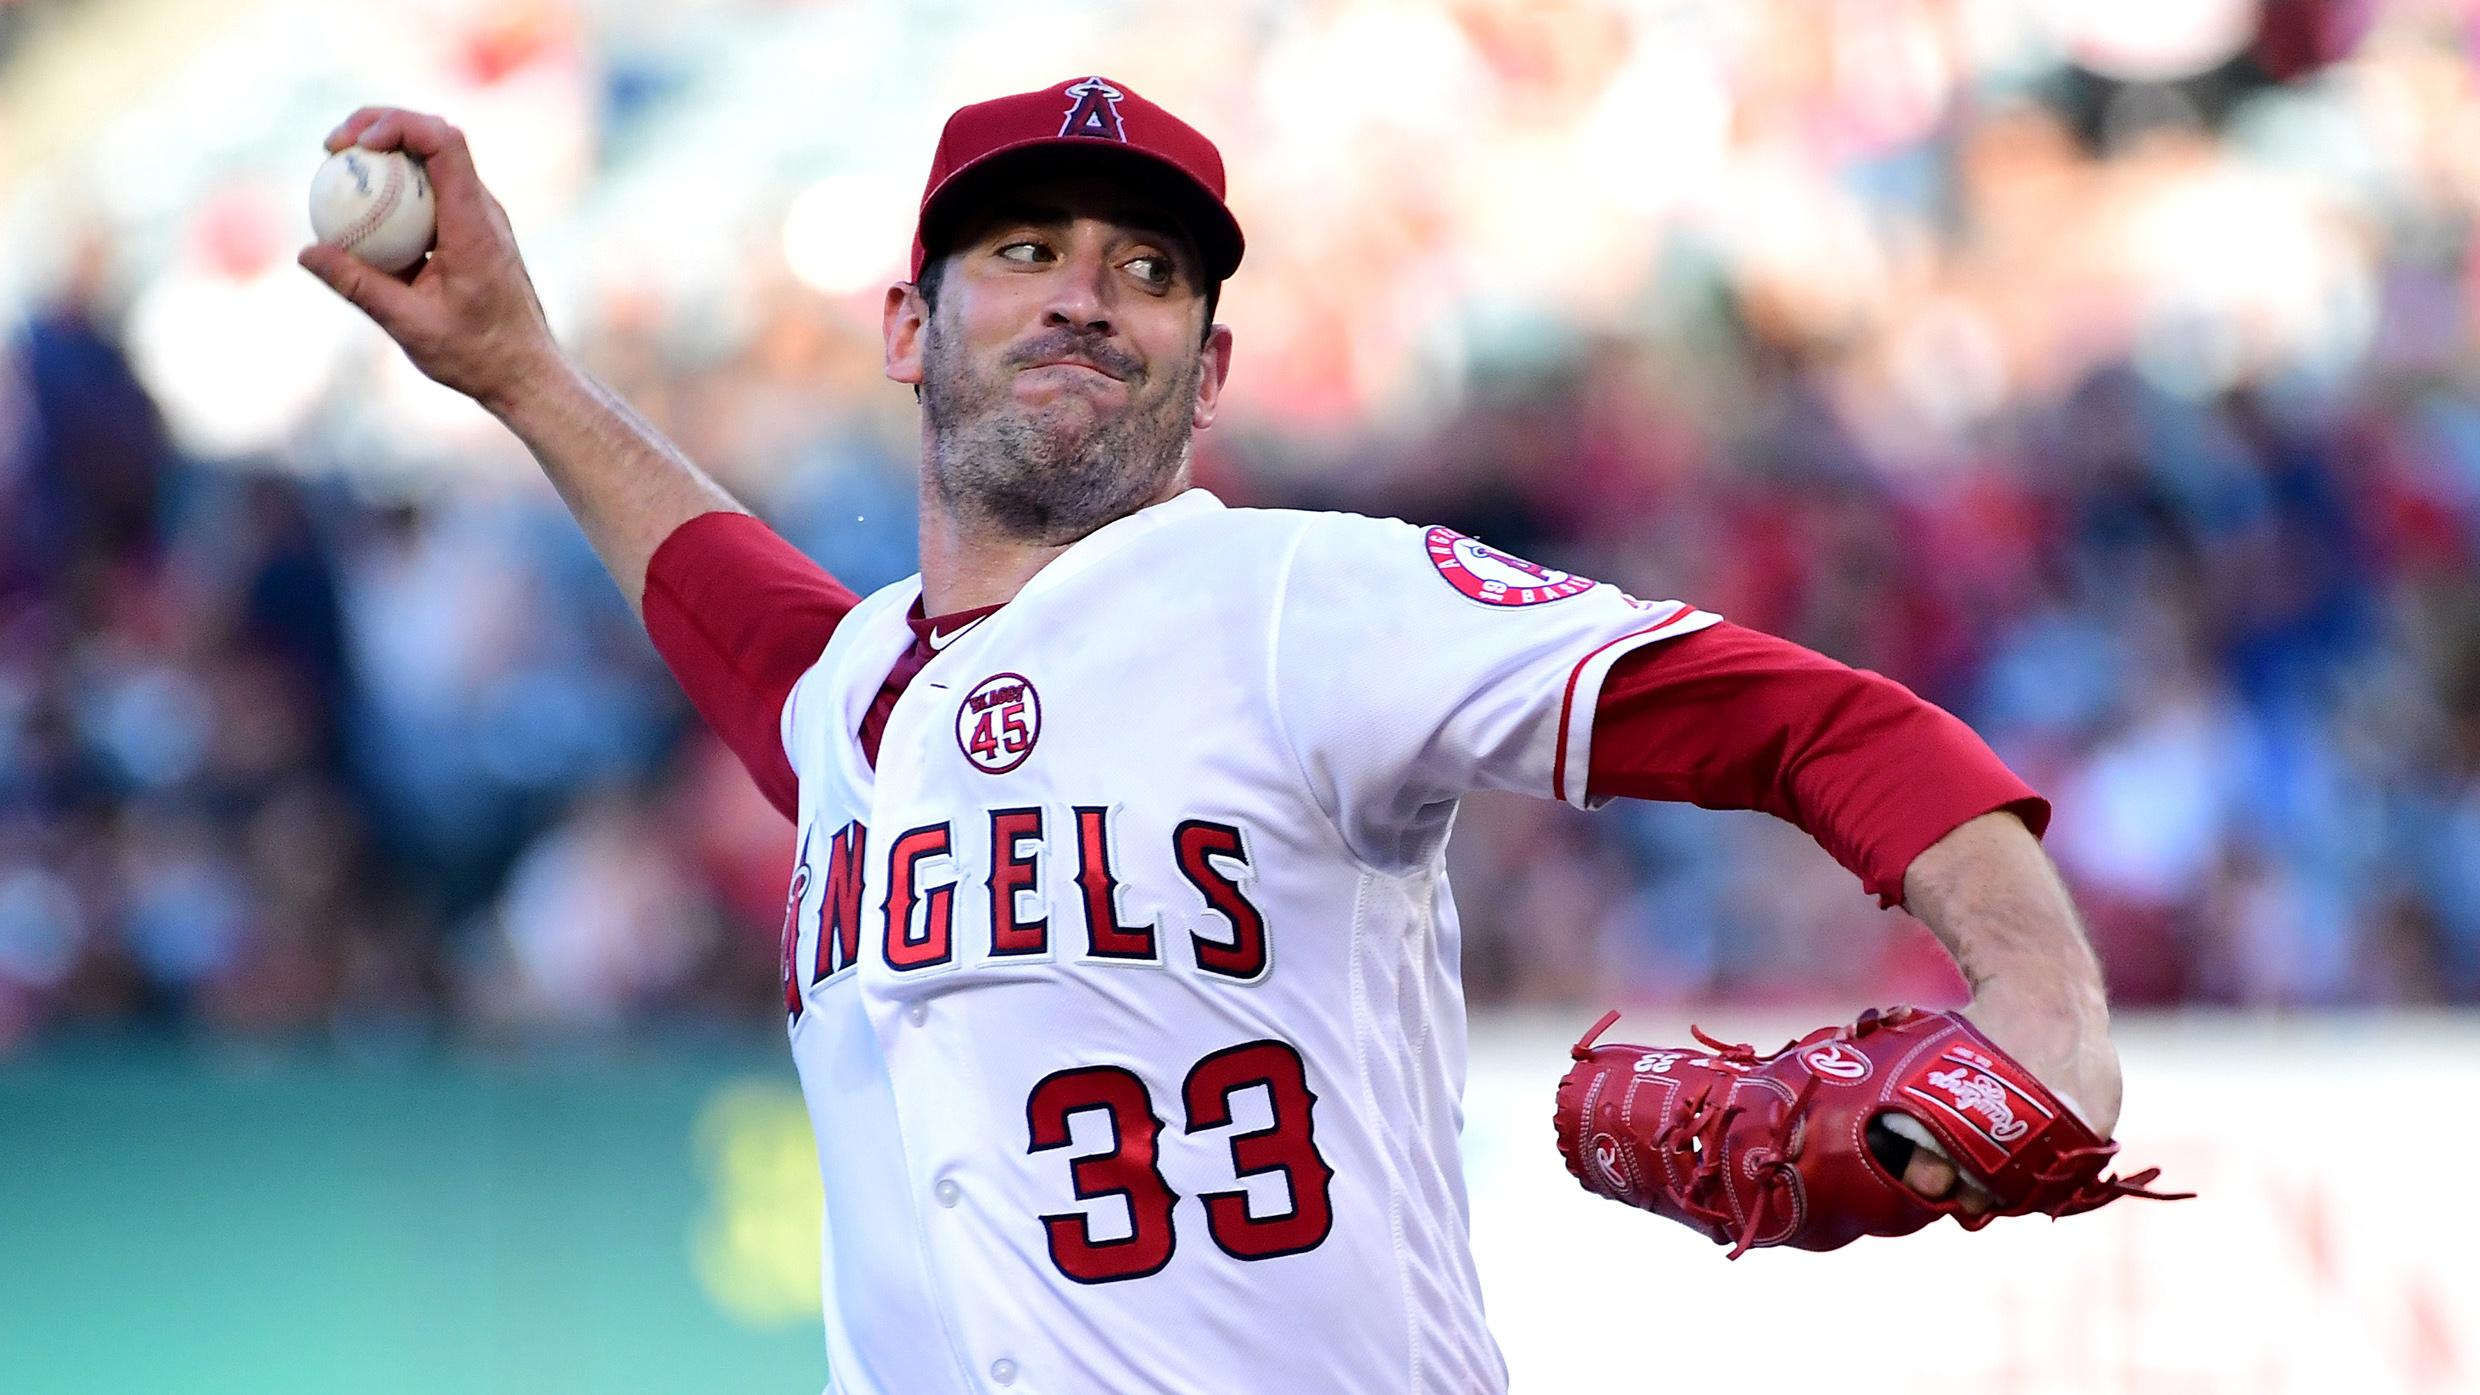 Jul 18, 2019; Anaheim, CA, USA; Los Angeles Angels starting pitcher Matt Harvey (33) pitches against the Houston Astros in the third inning at Angel Stadium of Anaheim. / Jayne Kamin-Oncea-USA TODAY Sports